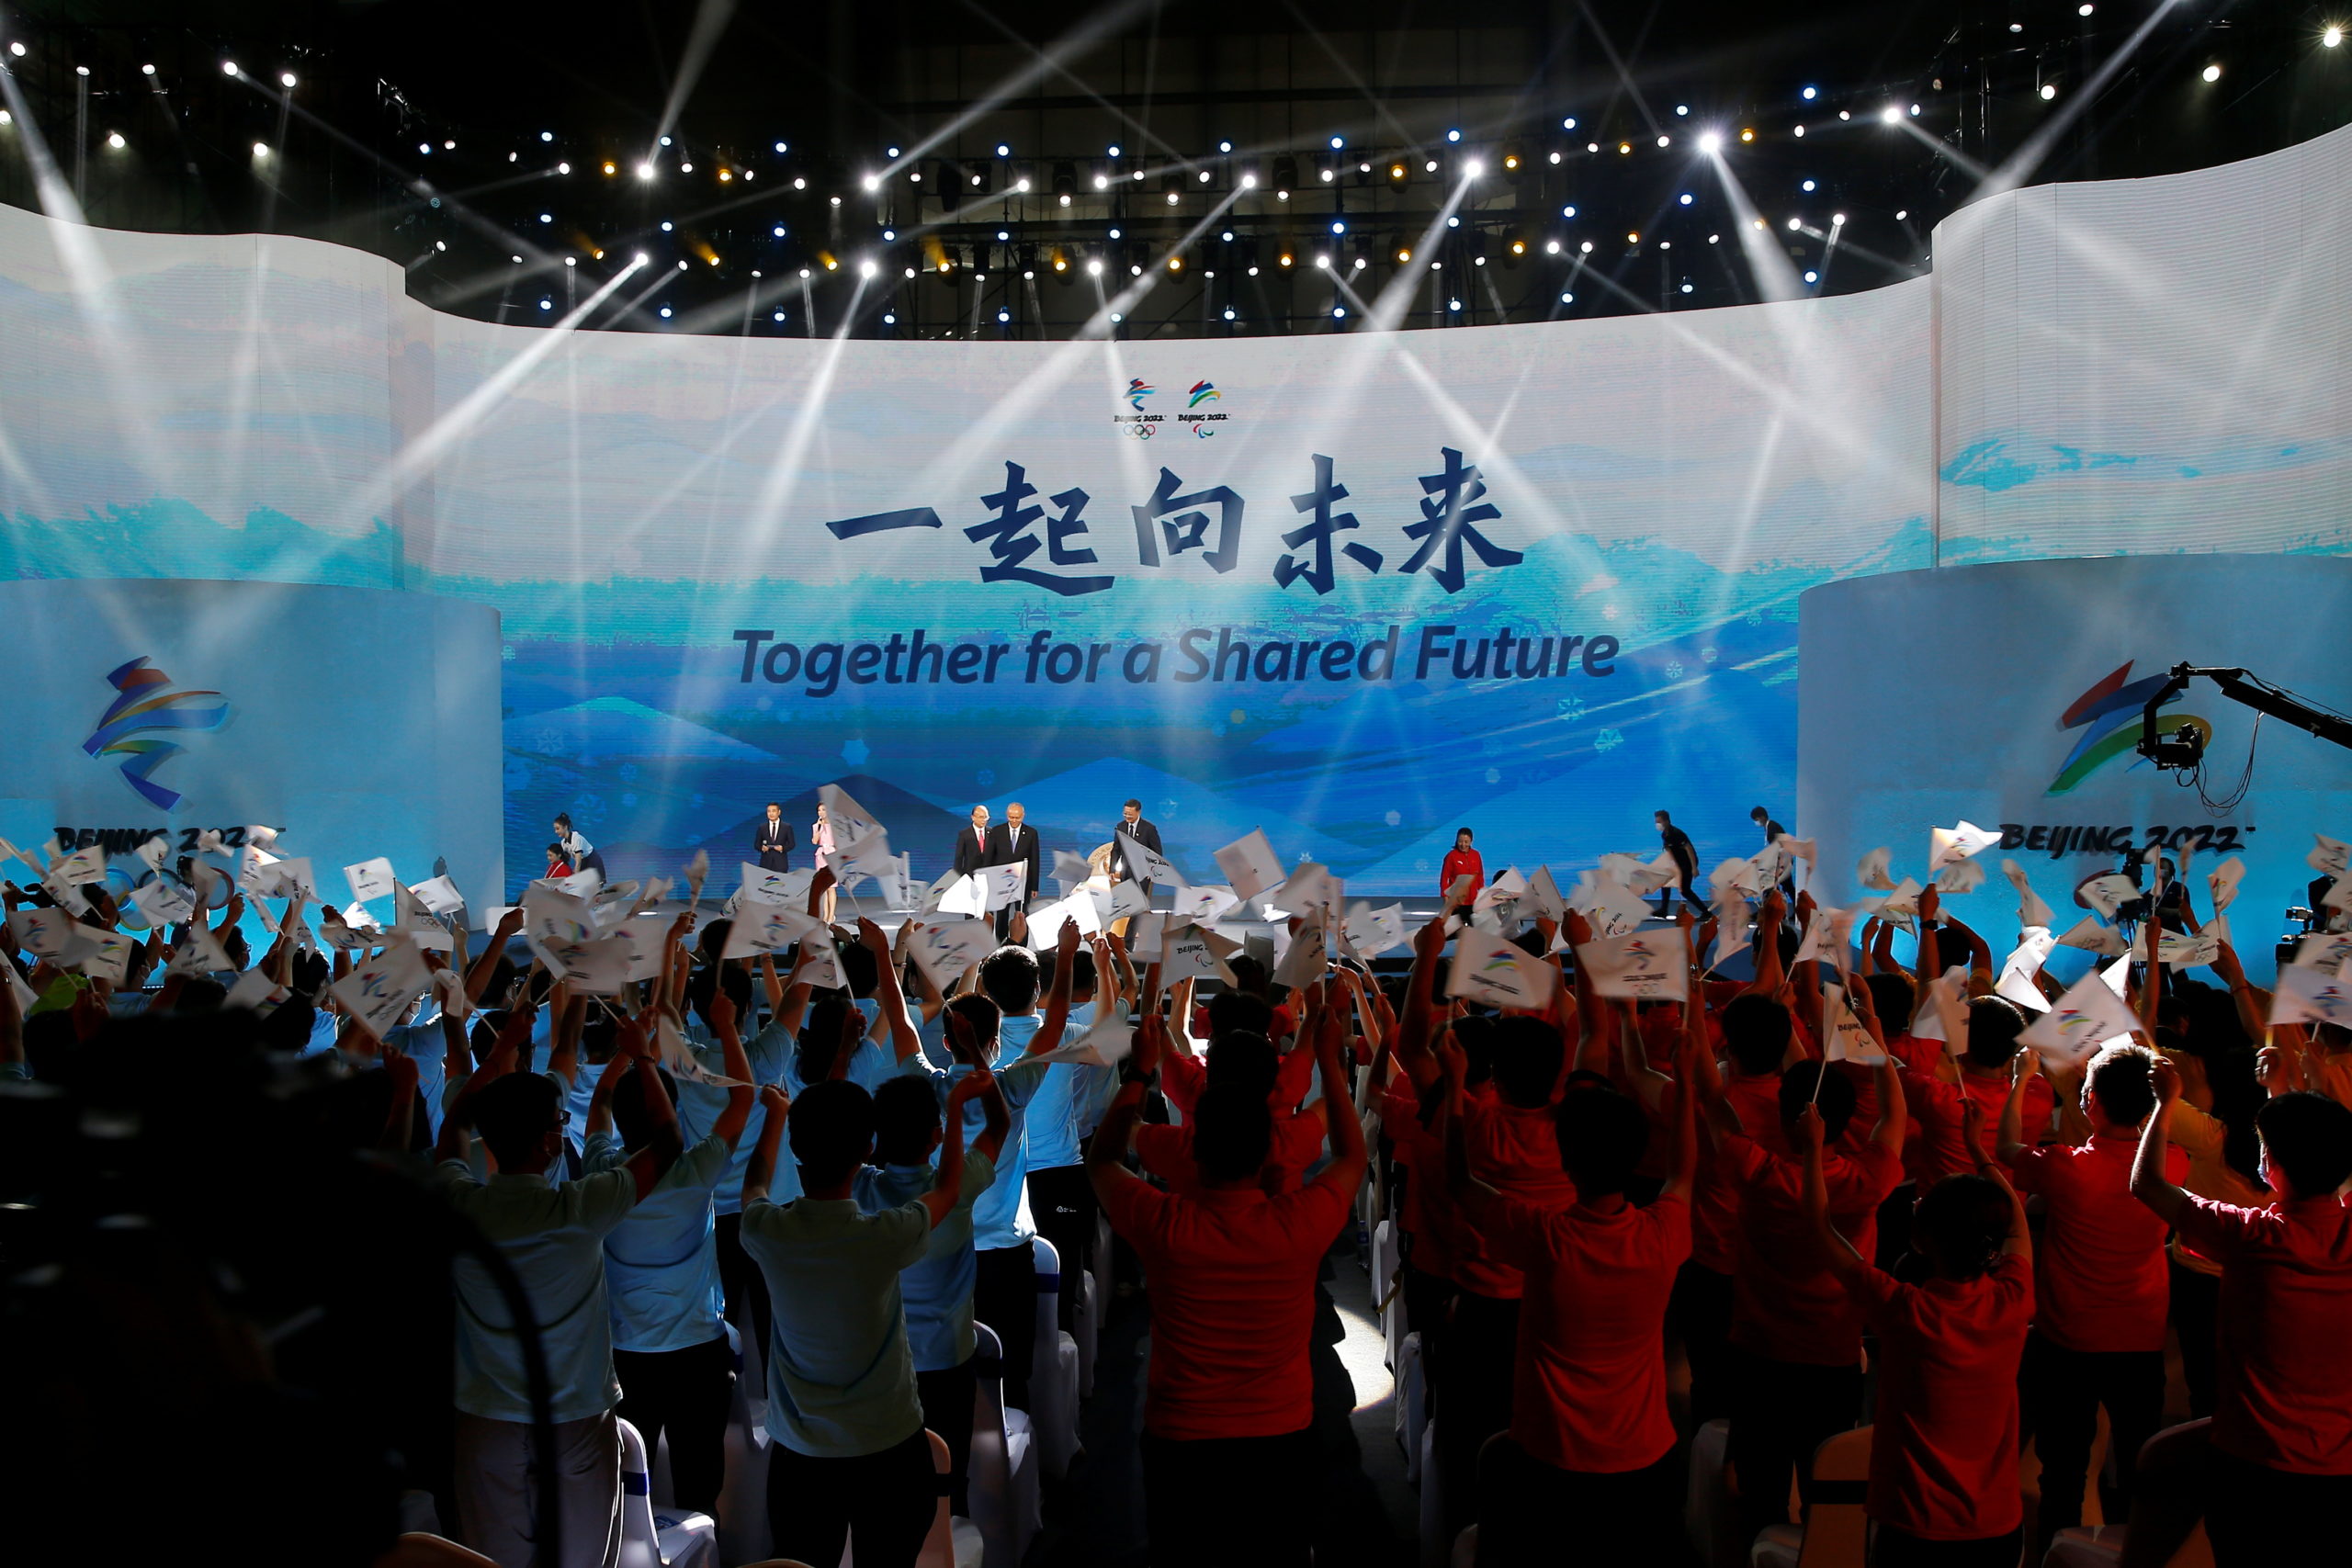 The slogan for the Beijing 2022 Winter Olympics, "Together for a shared future", is unveiled on a giant screen at a ceremony in Beijing, China 